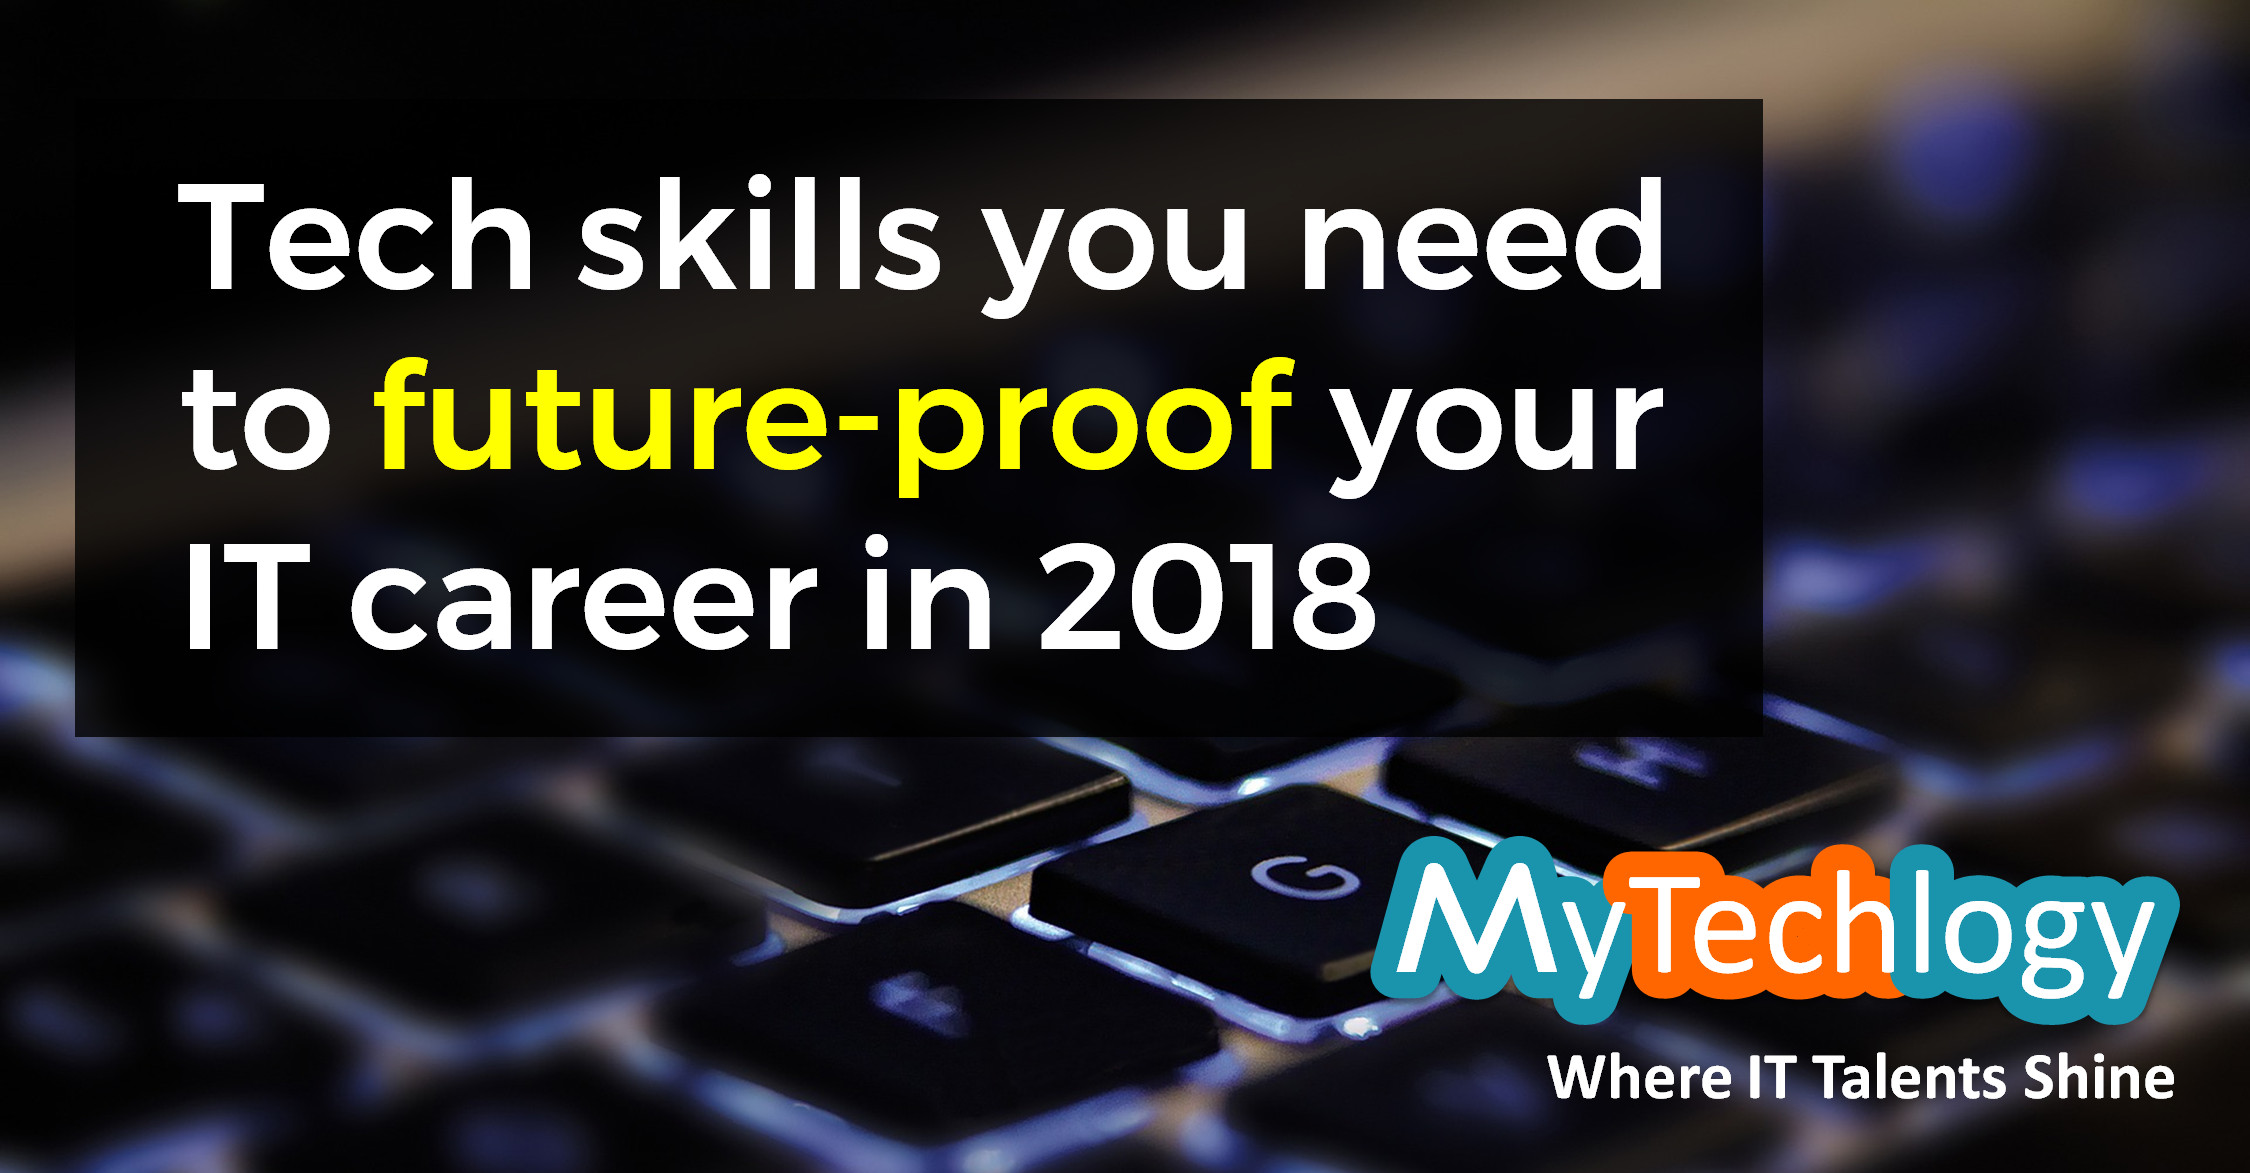 Tech skills you need to future-proof your IT career in 2018 - Image 1